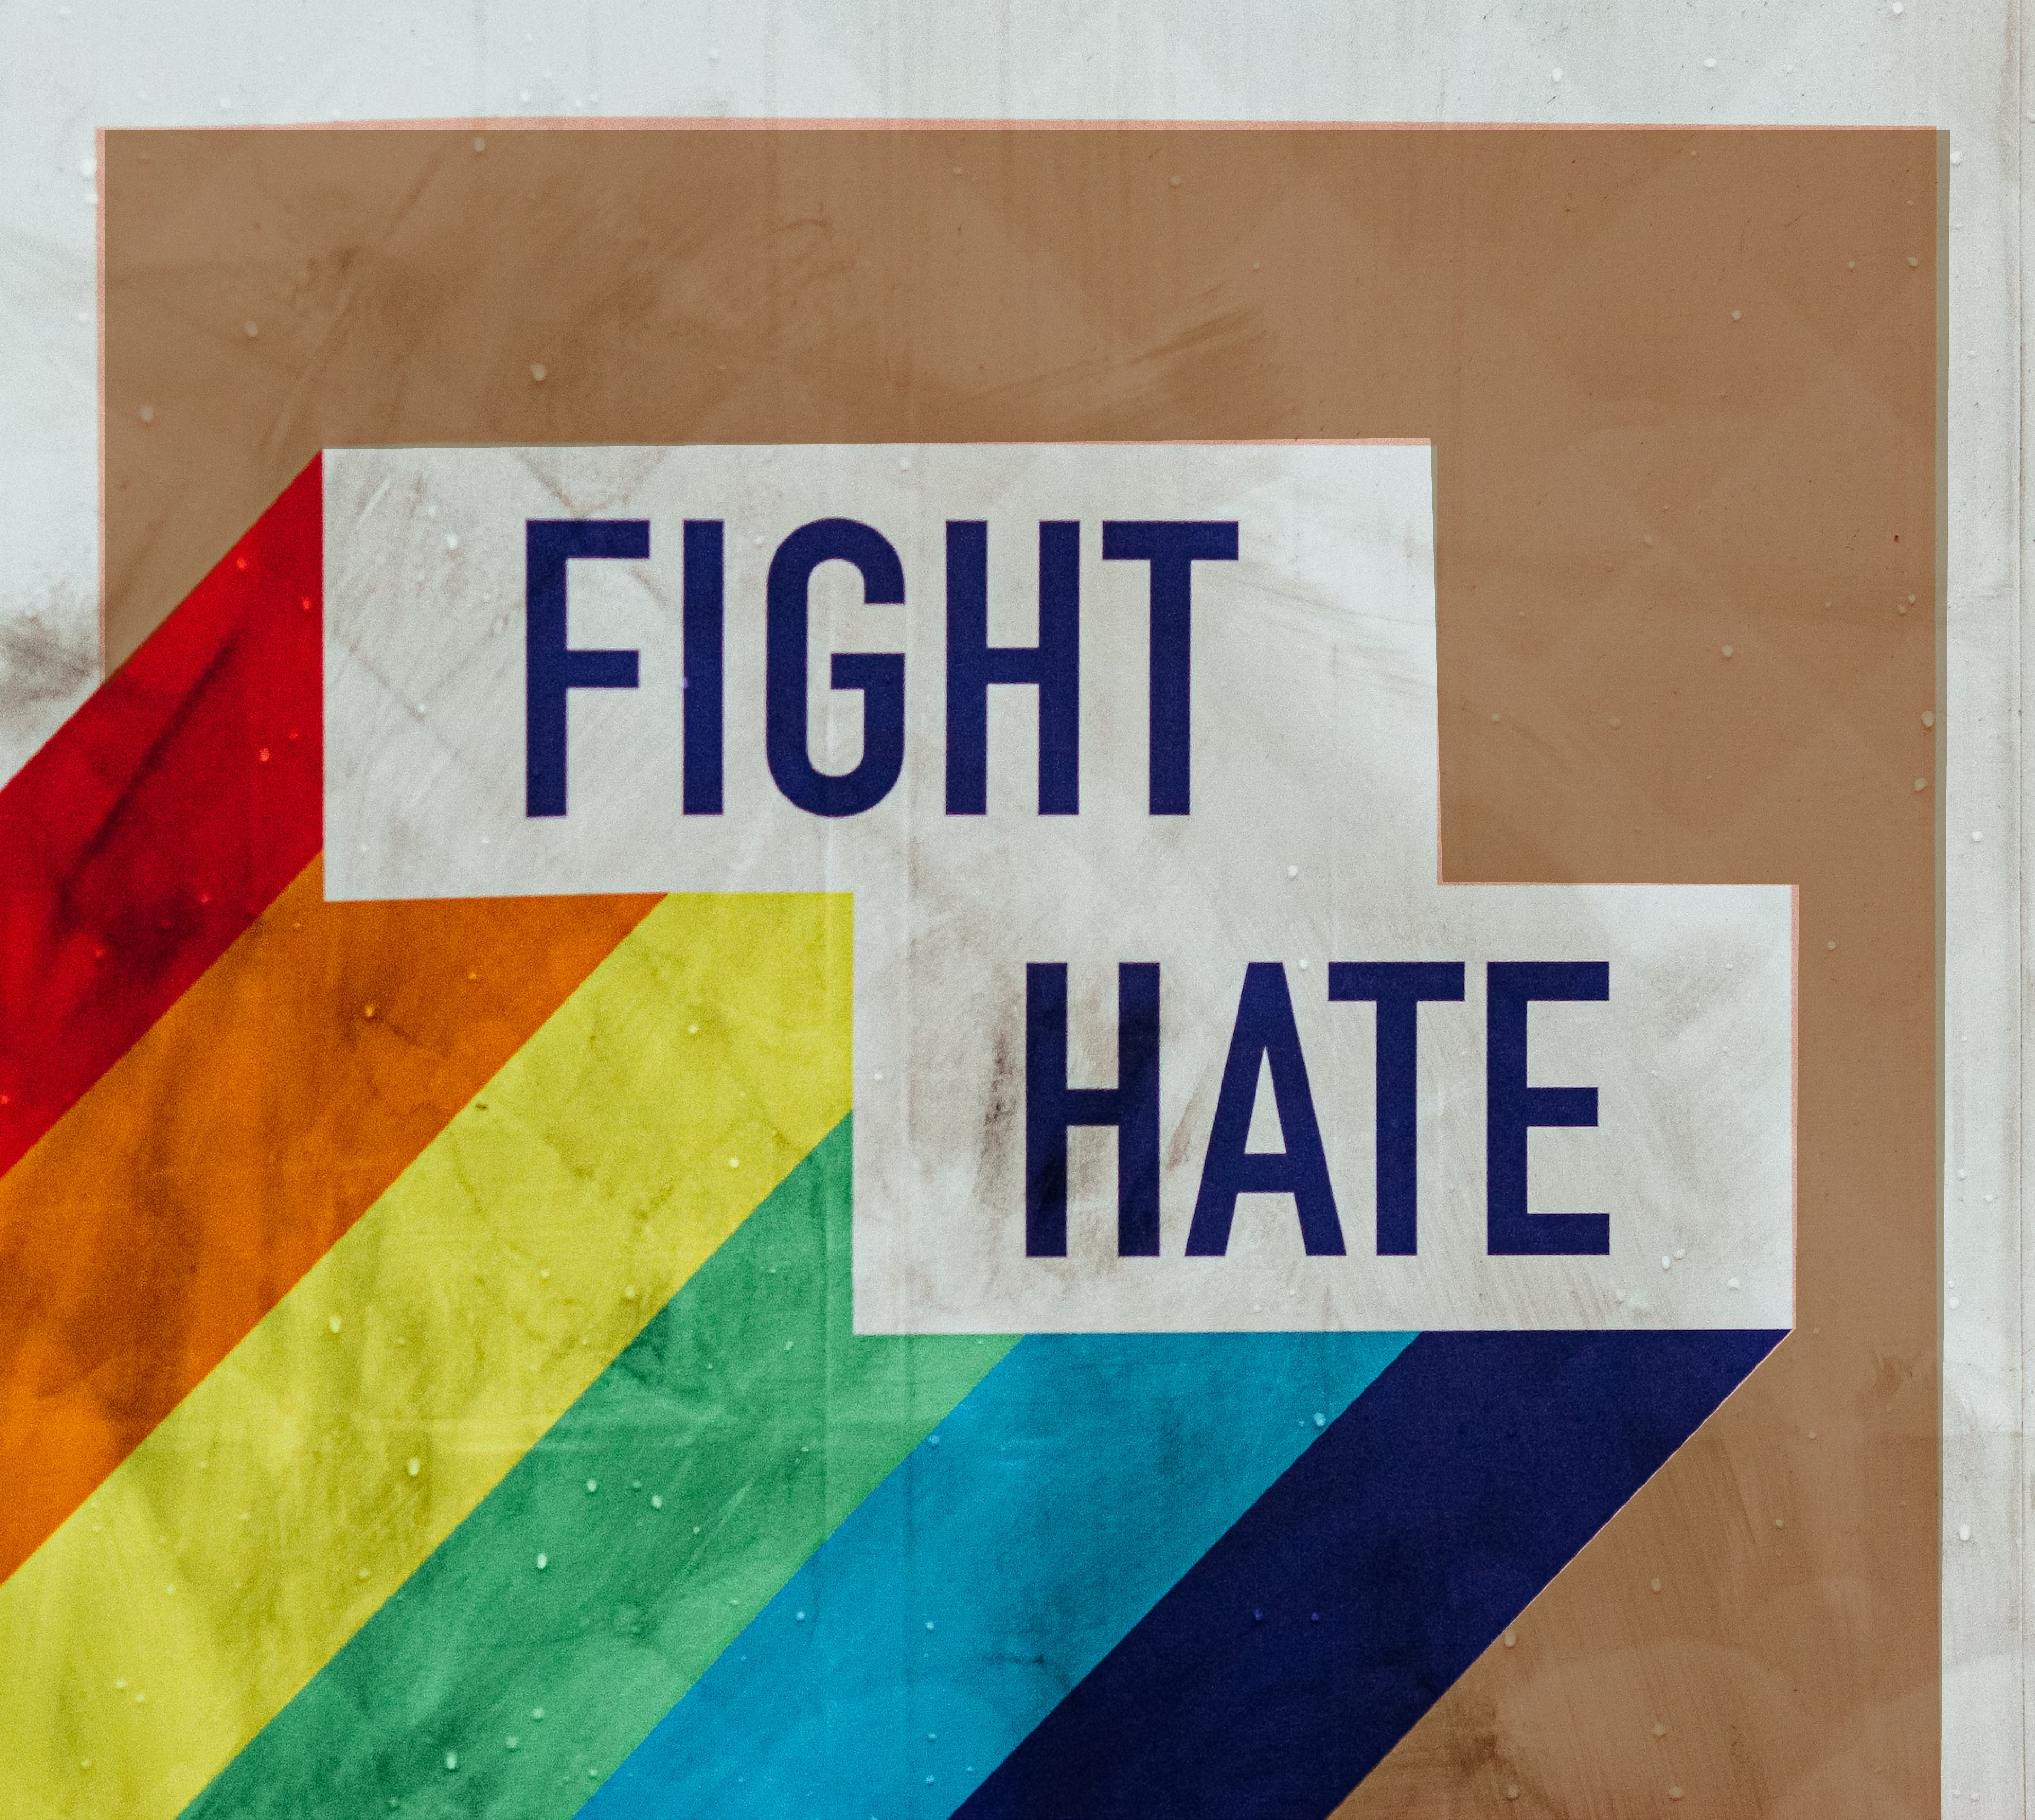 An anti-hate image for the CUNY SPS Anti-Hate Initiative